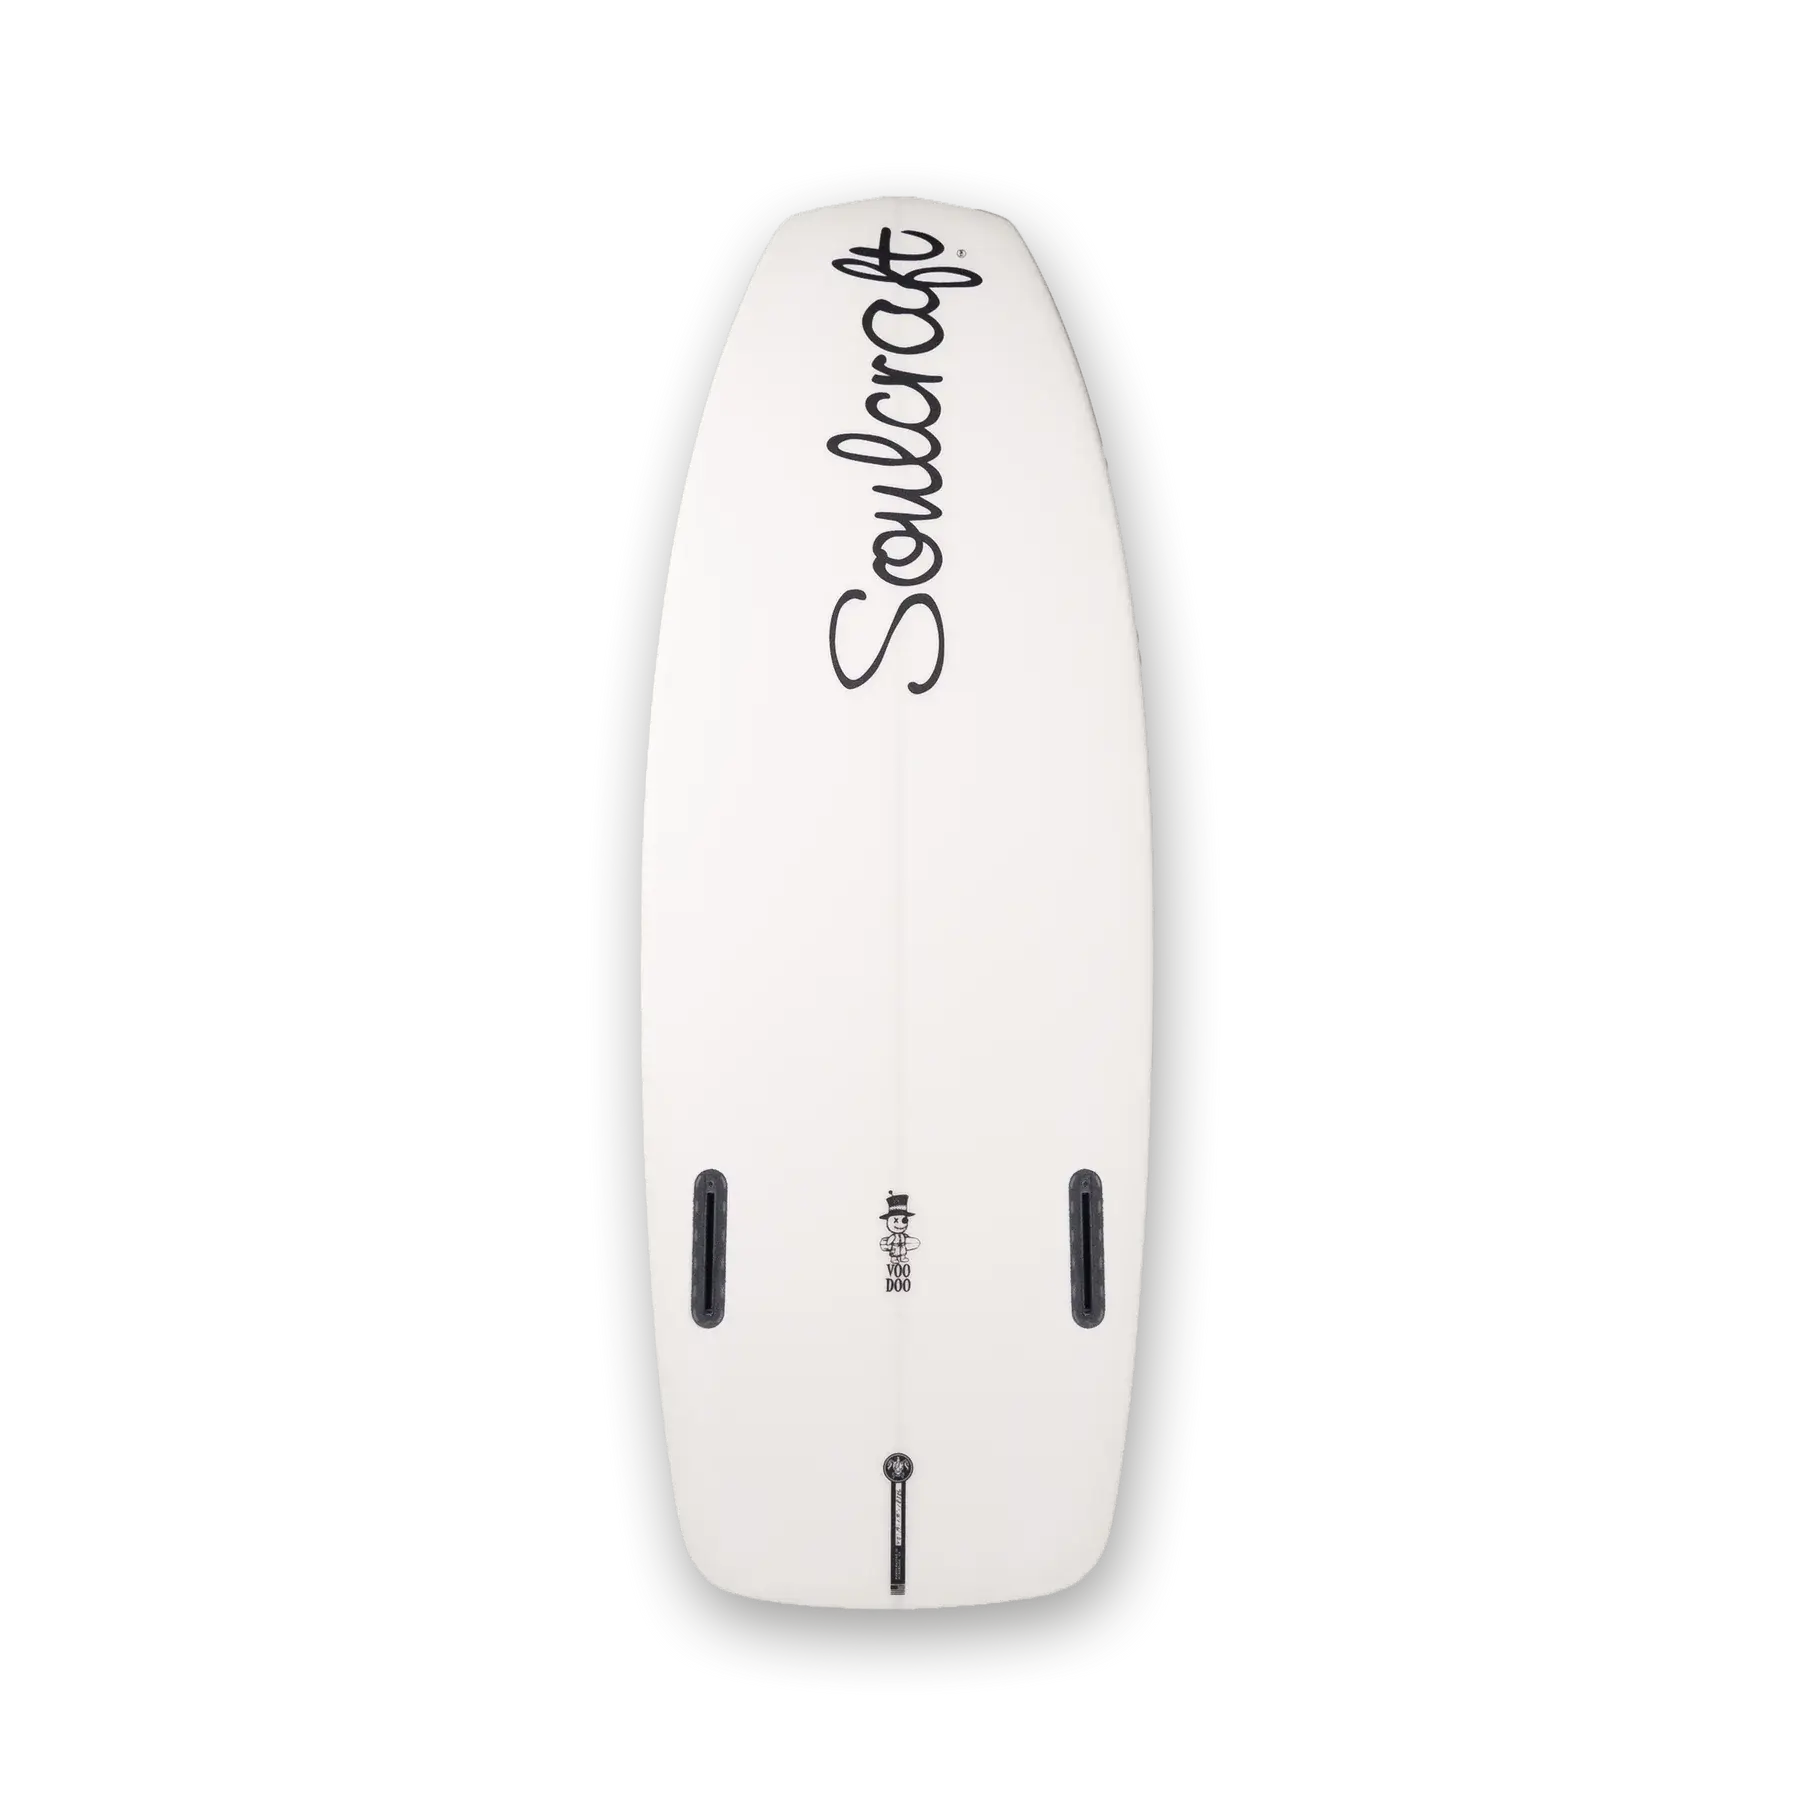 A fast white Soulcraft Voodoo Wakesurf Board, showcasing the expertise of a Soulcraft rider, set against a sleek black background.